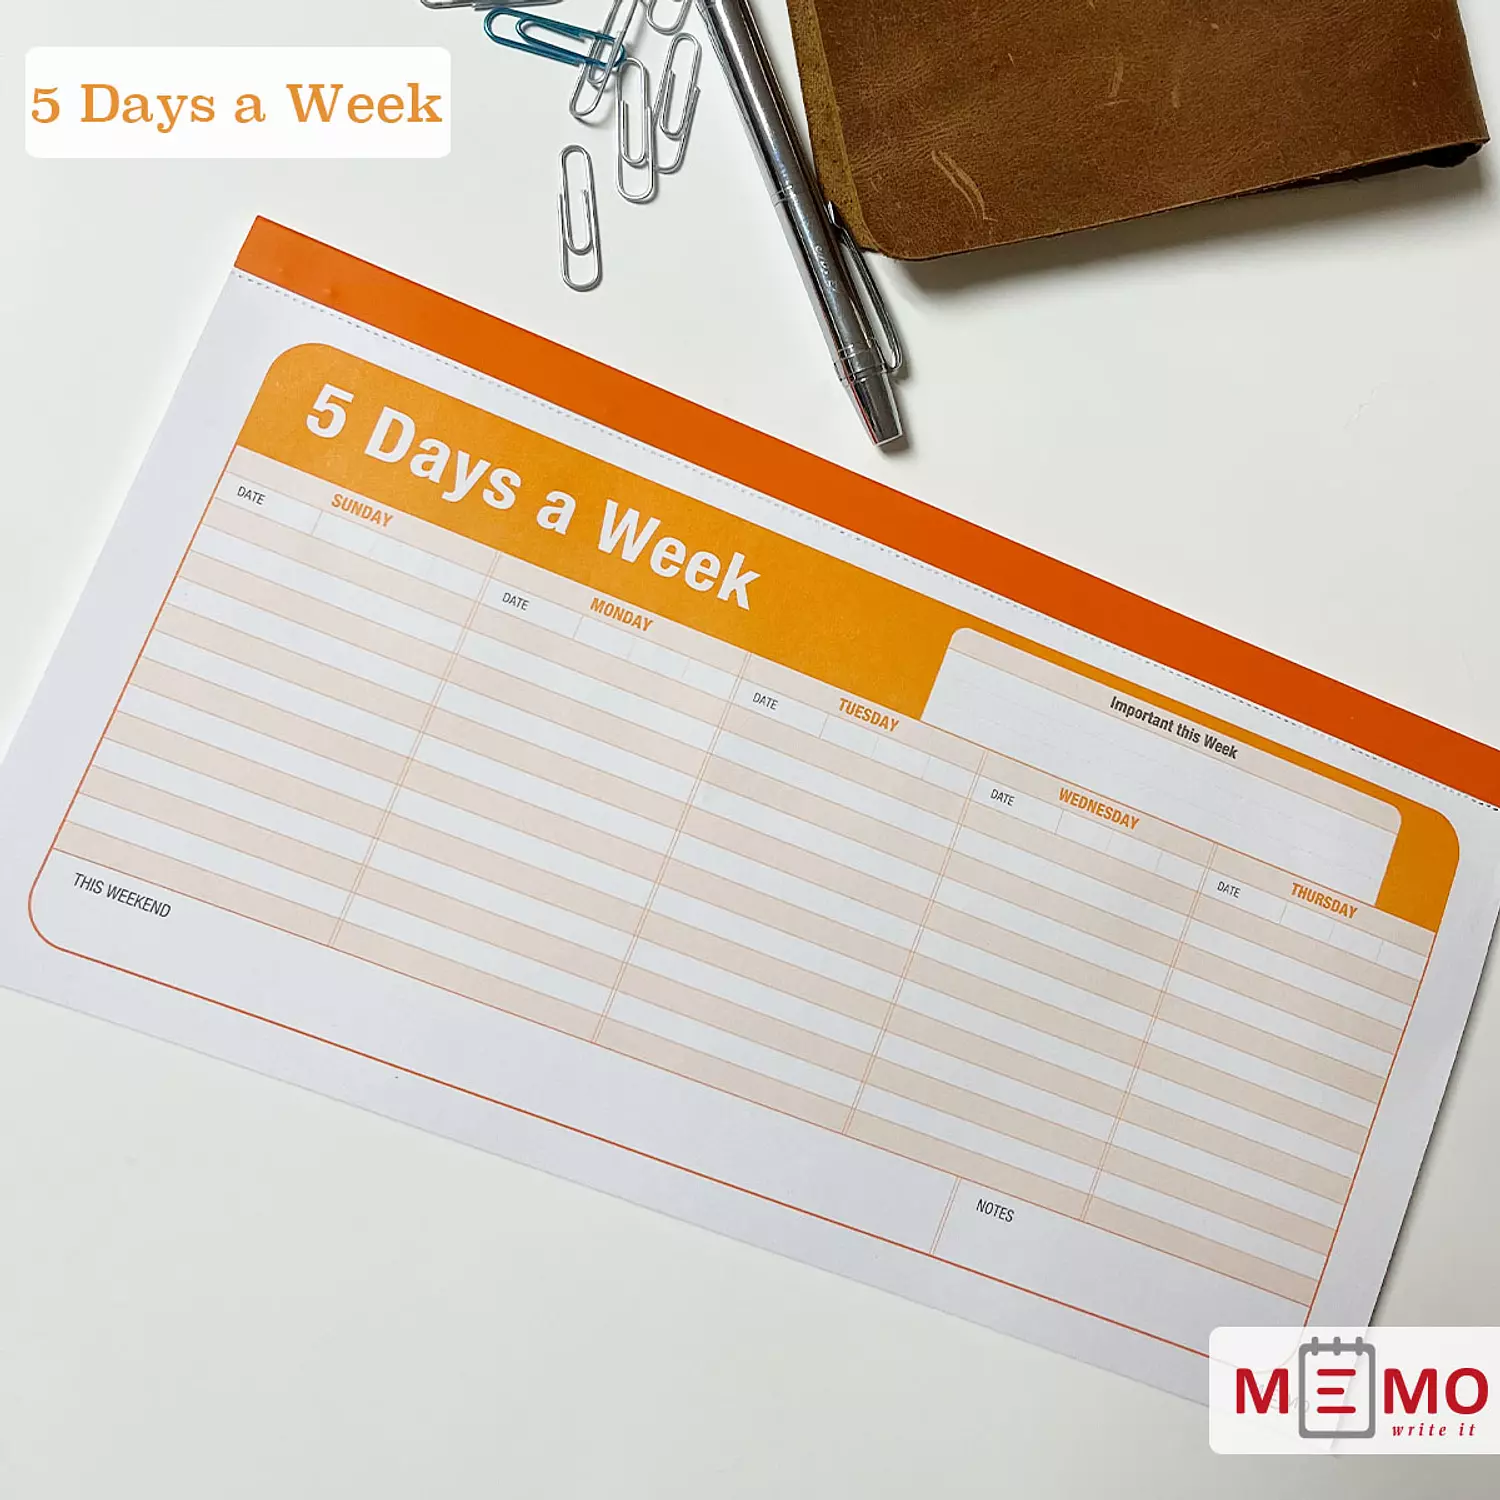  Memo 5 days a week hover image